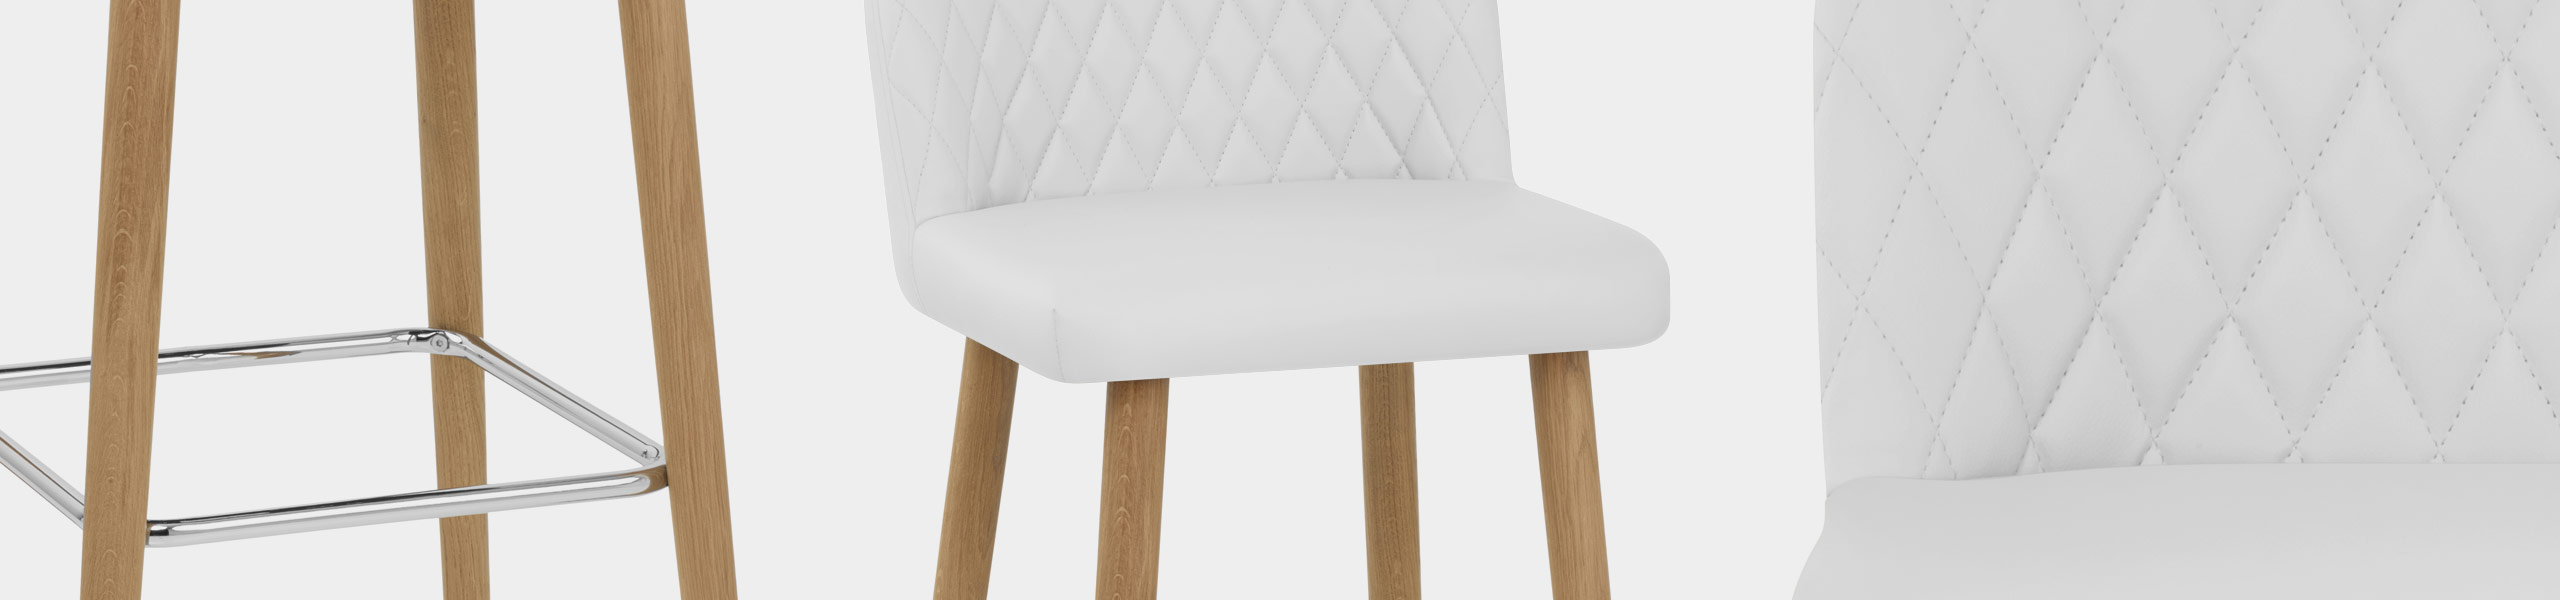 Pacific Wooden Stool White Video Banner